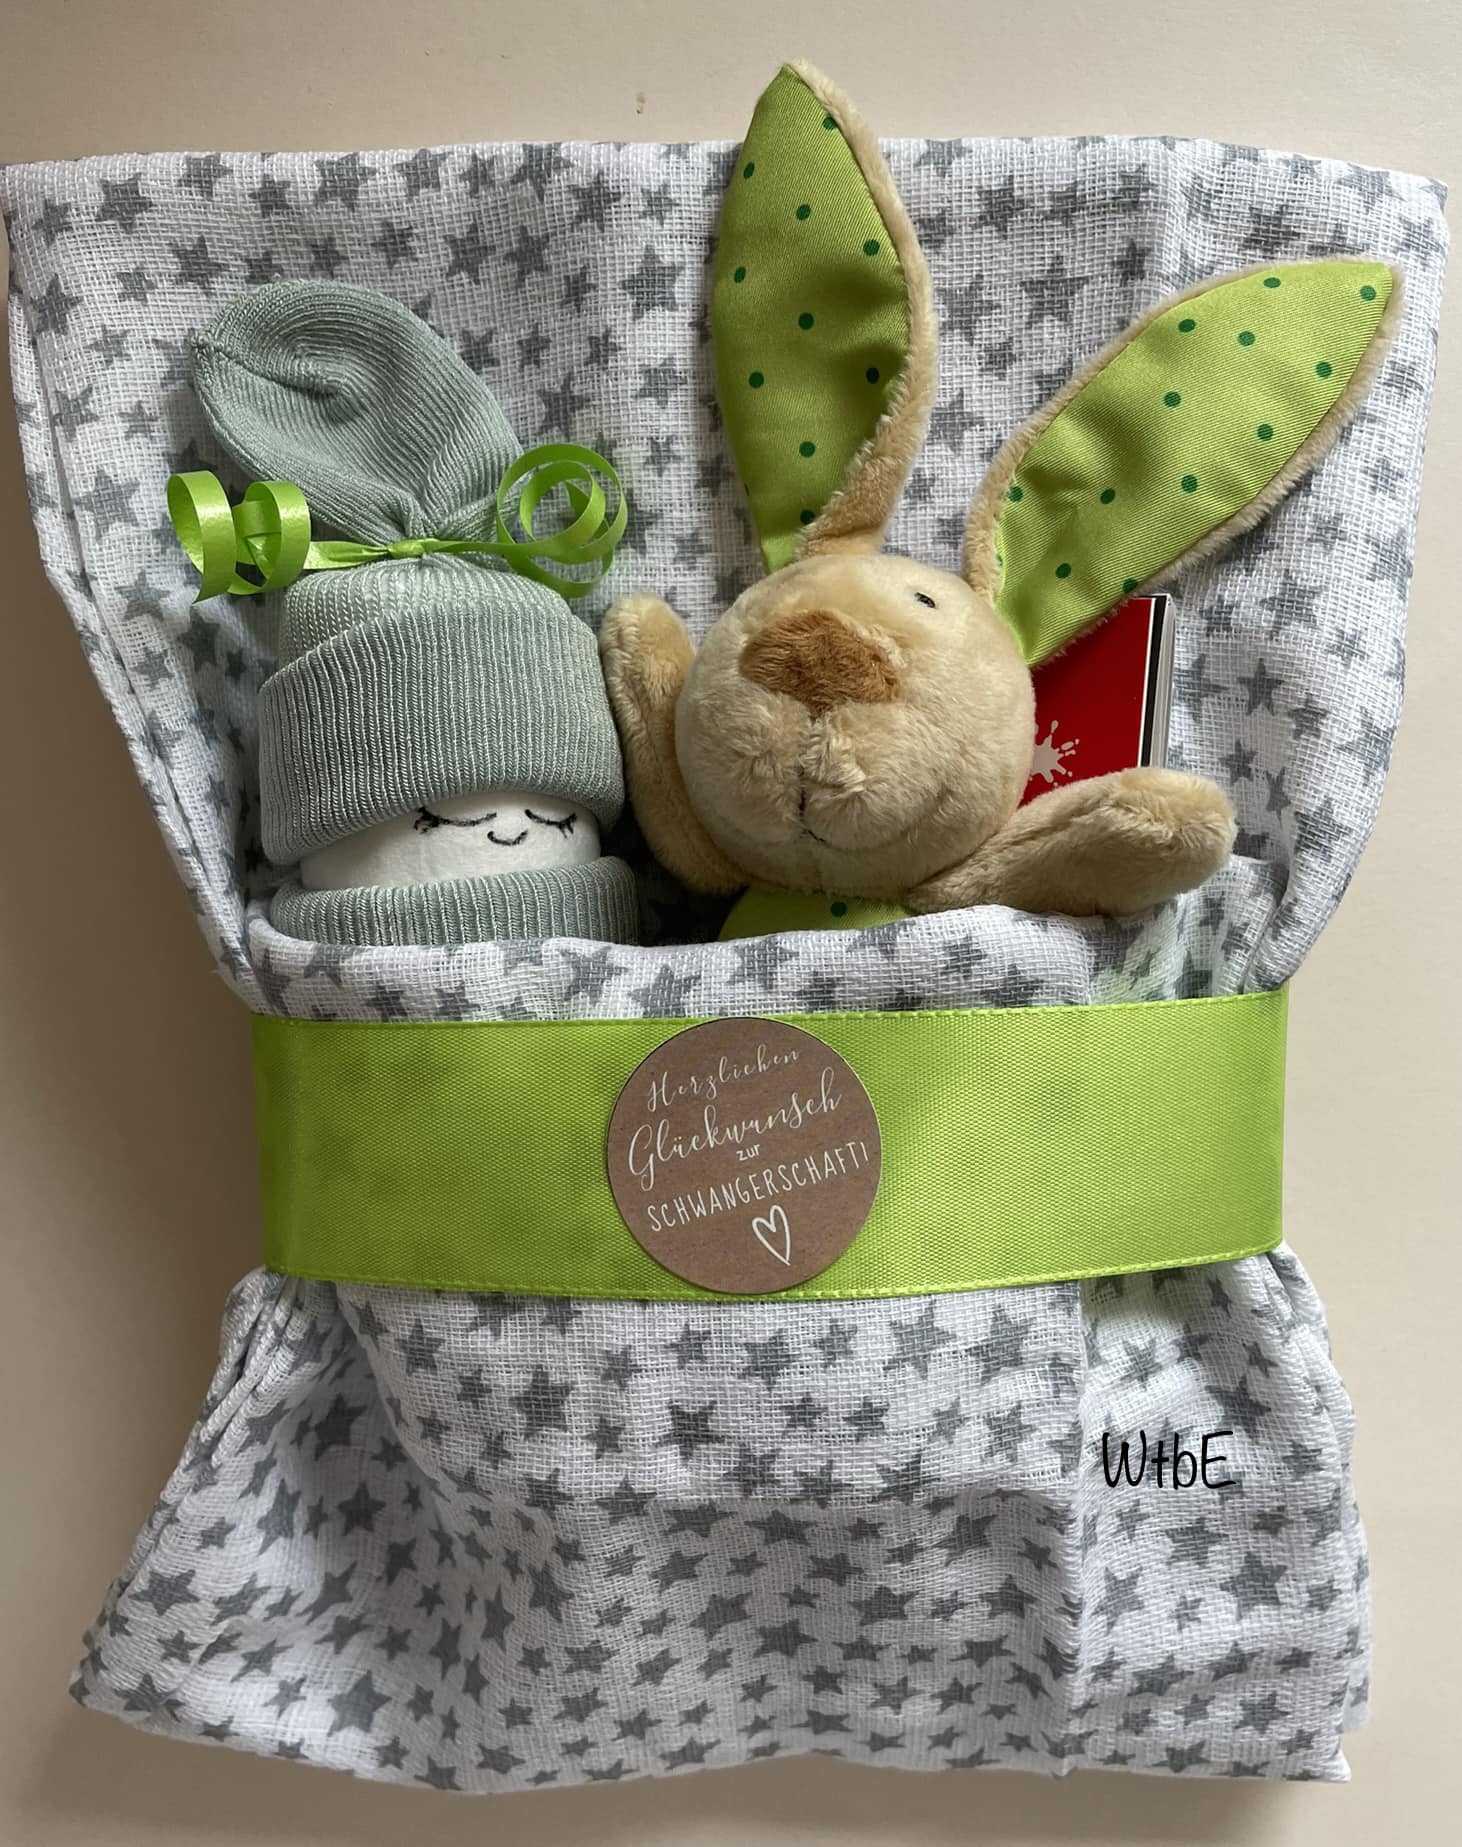 a baby diaper and a rattling rabbit toy placed on a cloth, unisex color, green and gray